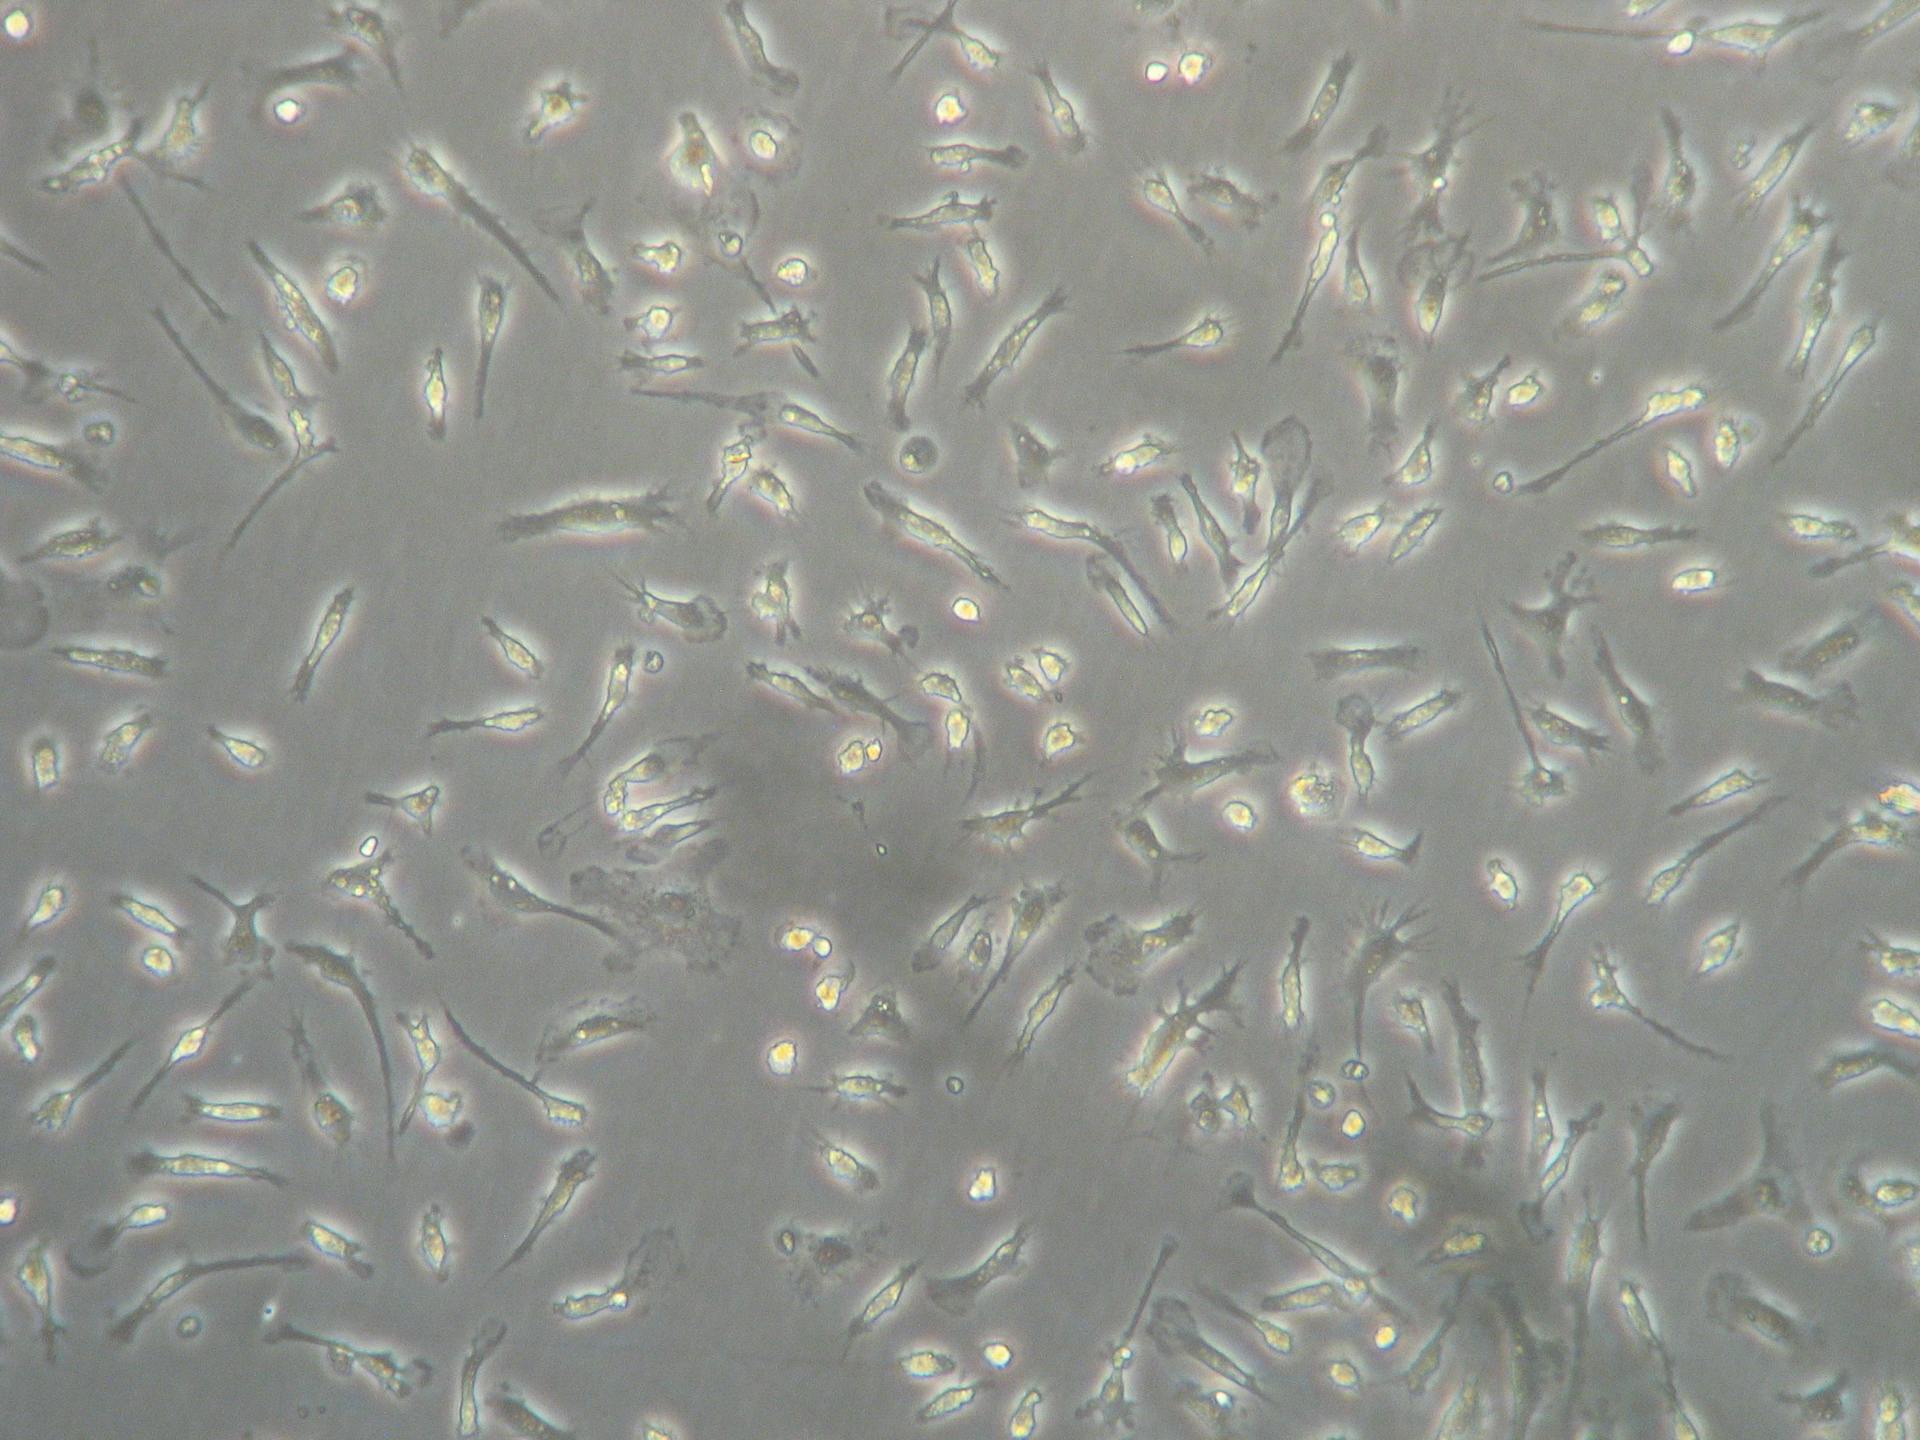 Image from a phase-contrast microscope, showing microglial cells. These cells slowly begin to ramify, and the more time they spend in culture, the more processes they develop.